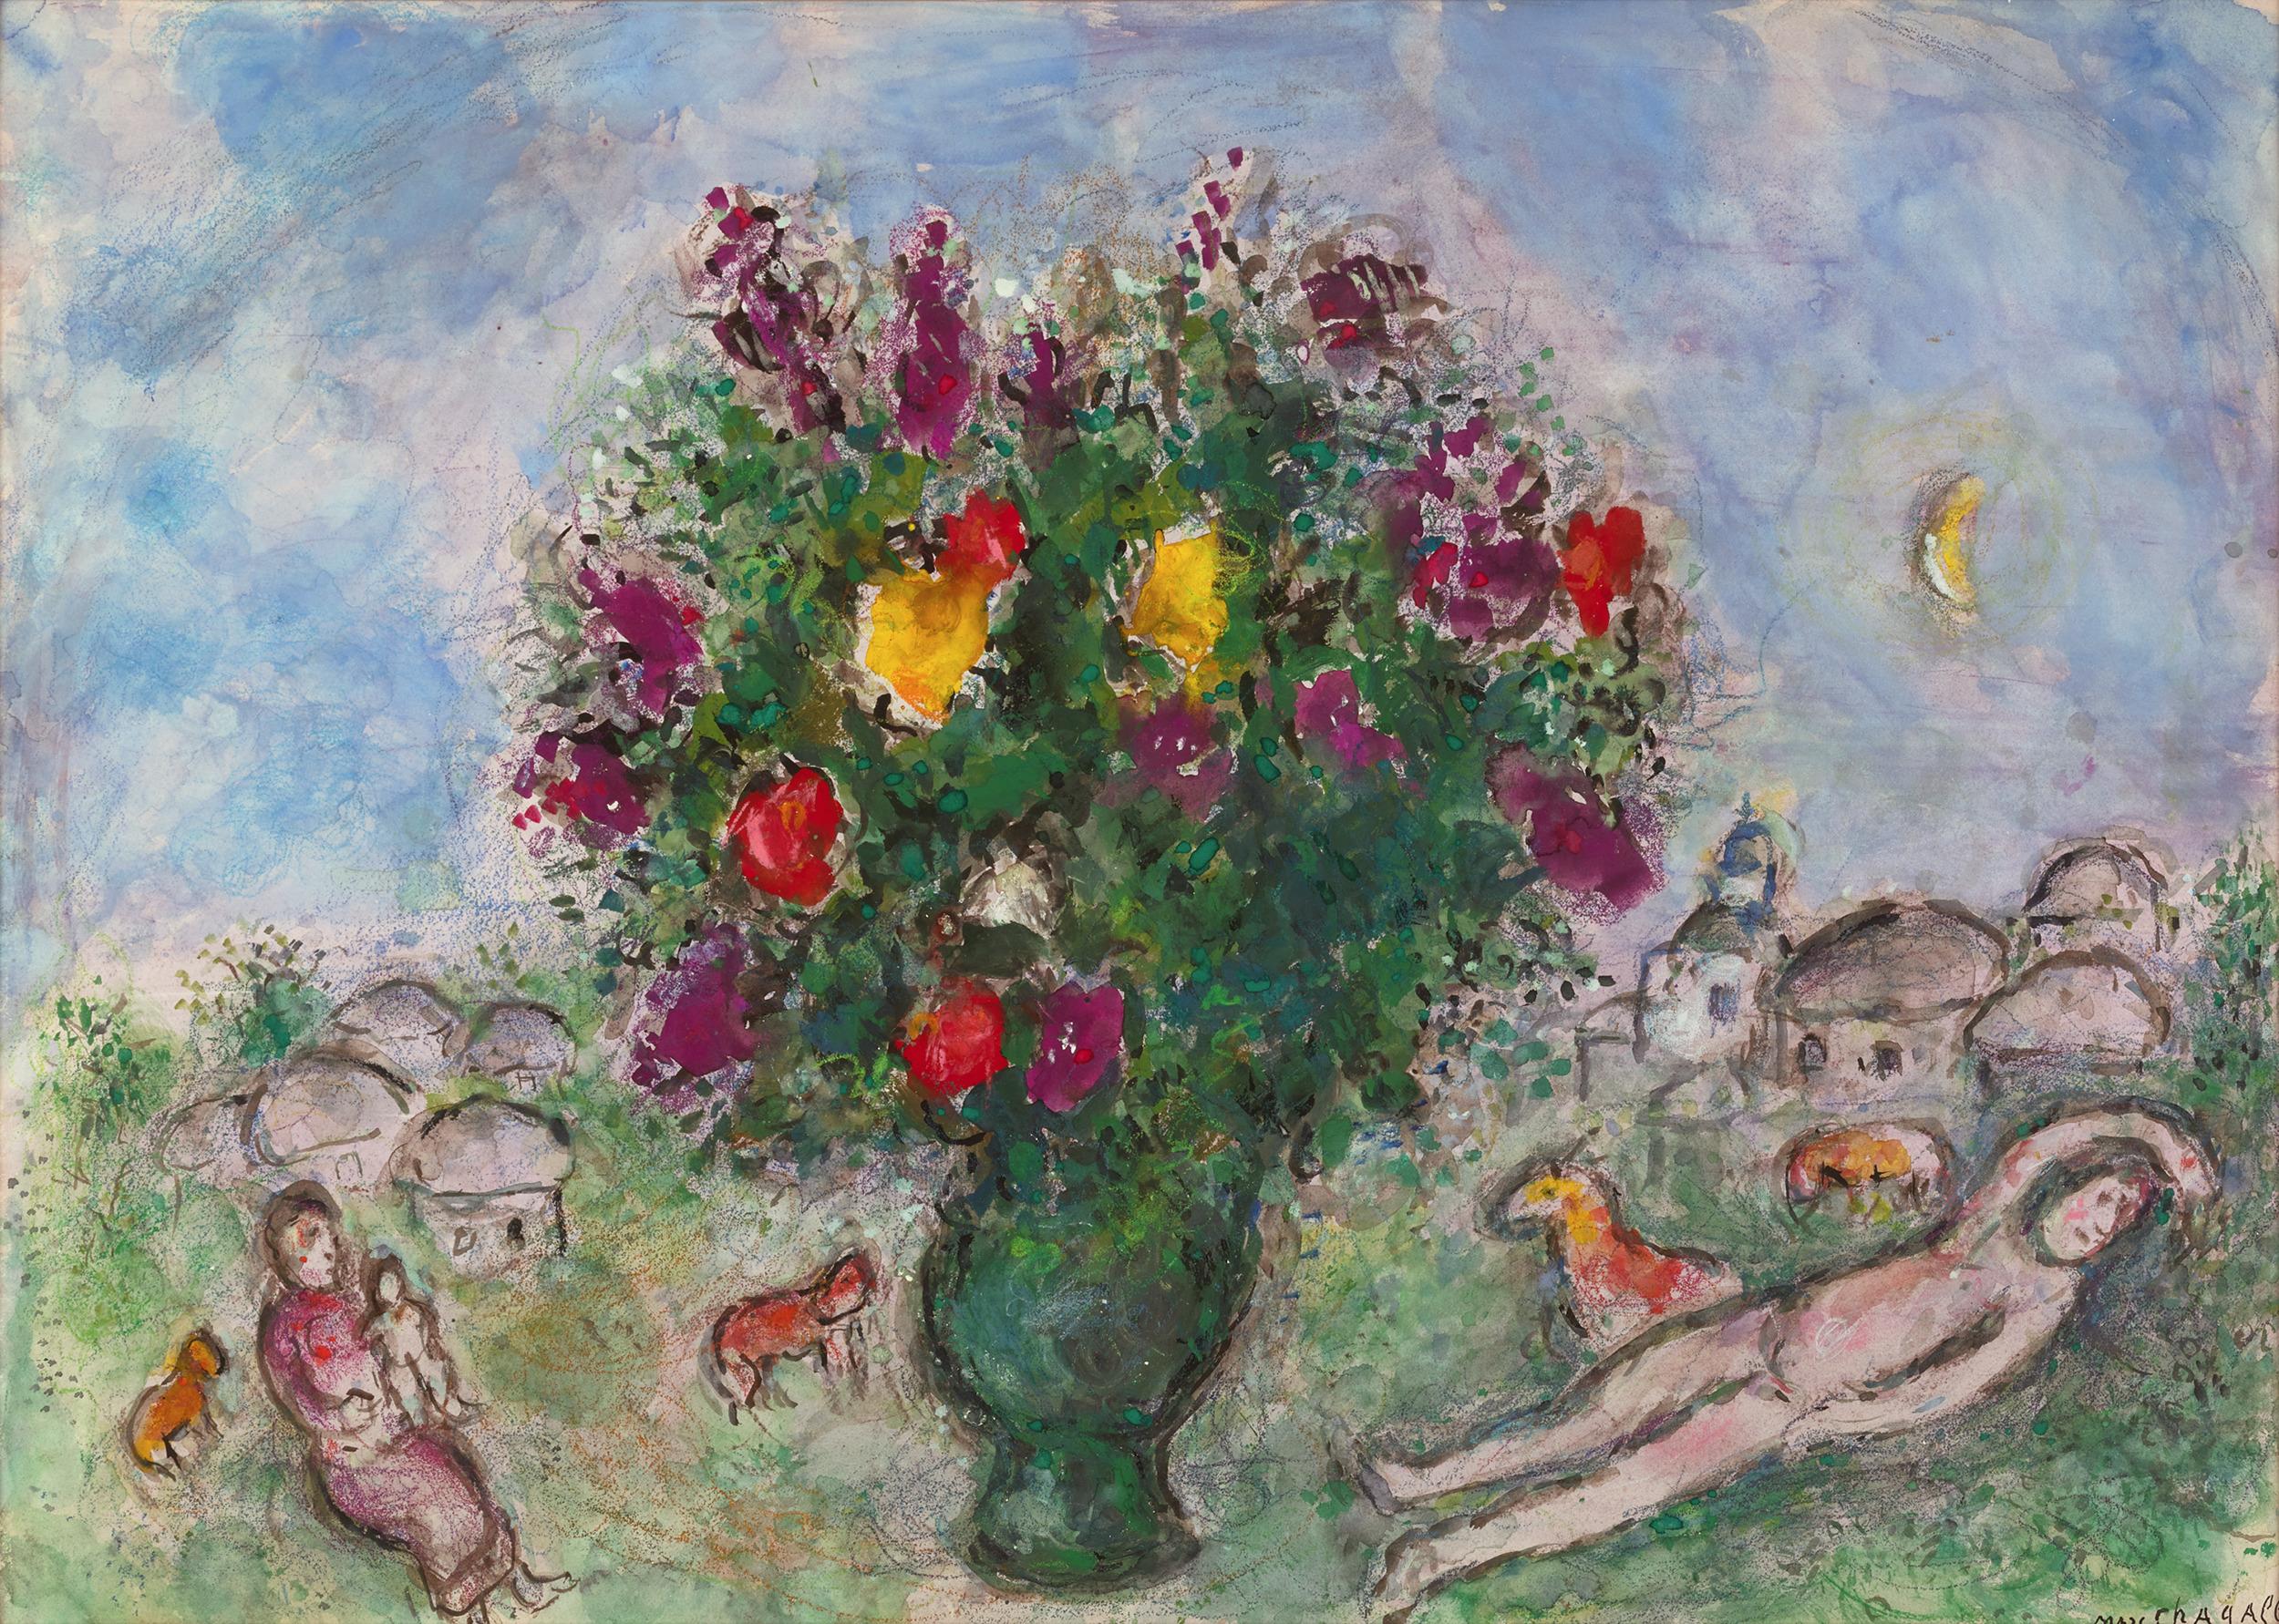 Marc Chagall
1887-1985  Russian

Le repos
(Rest)

Signed “Marc Chagall“ (lower right)
Gouache, watercolor and pastel on paper

Master Marc Chagall composed this contemplative and dreamlike painting entitled Le repos, which hails from the later years